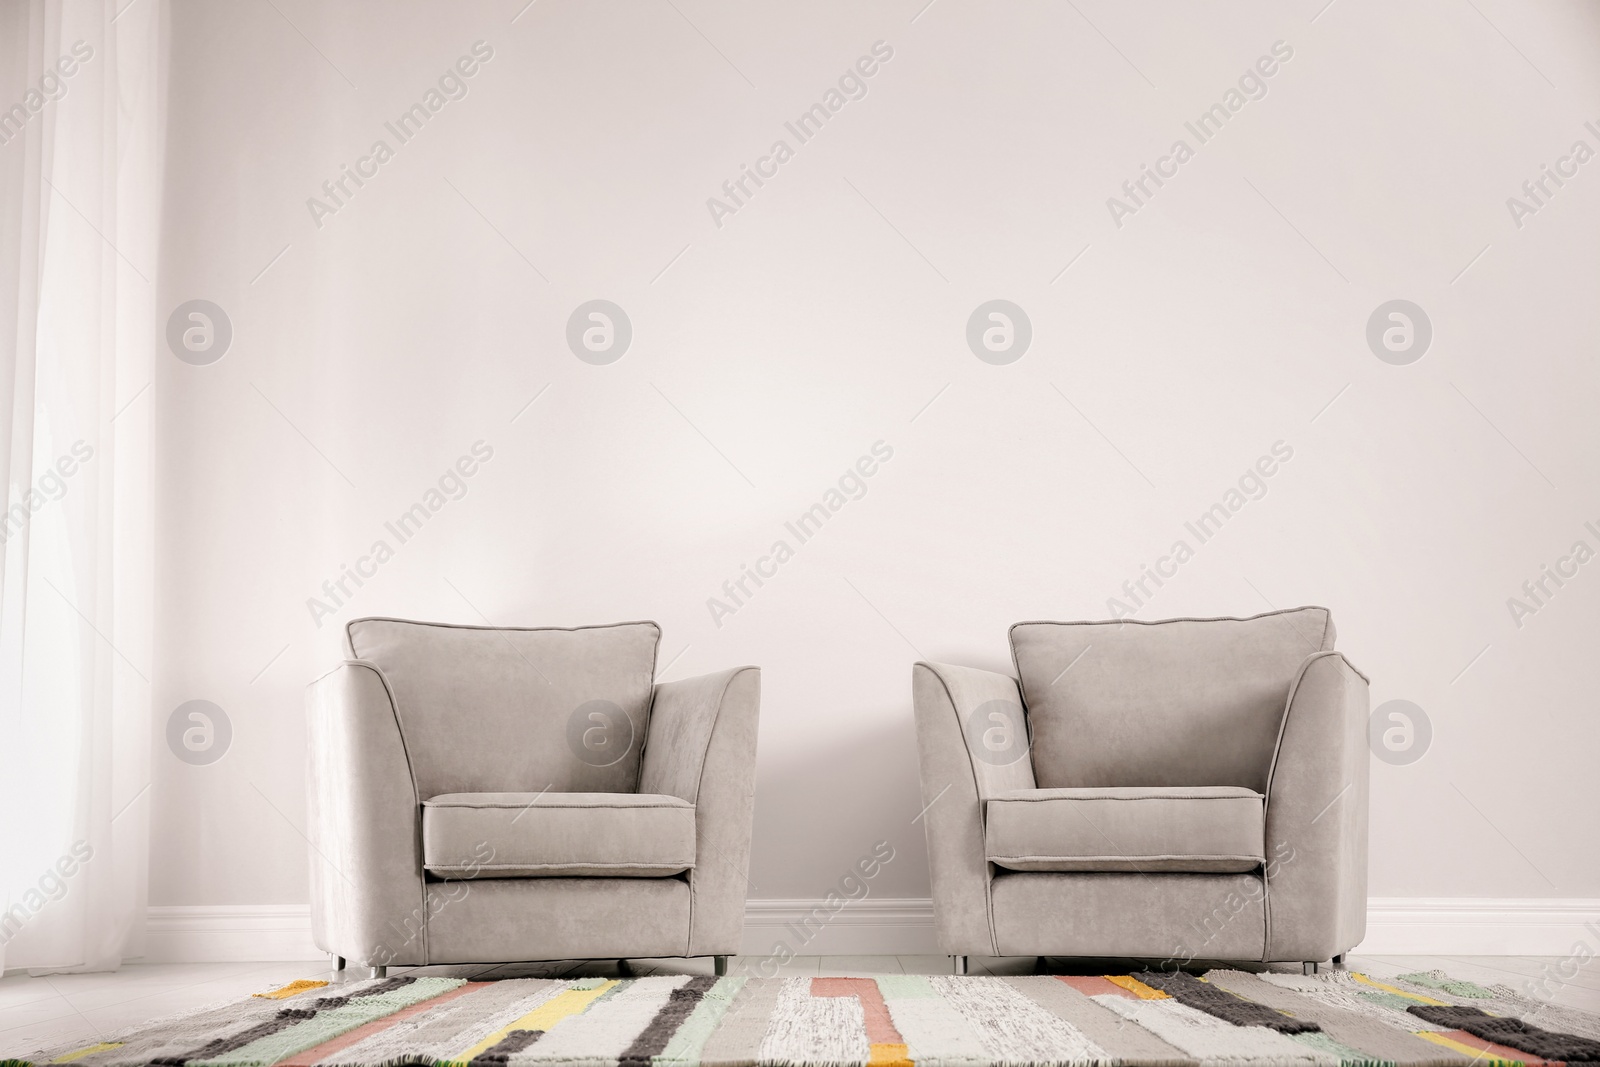 Photo of Living room interior with comfortable armchairs near wall